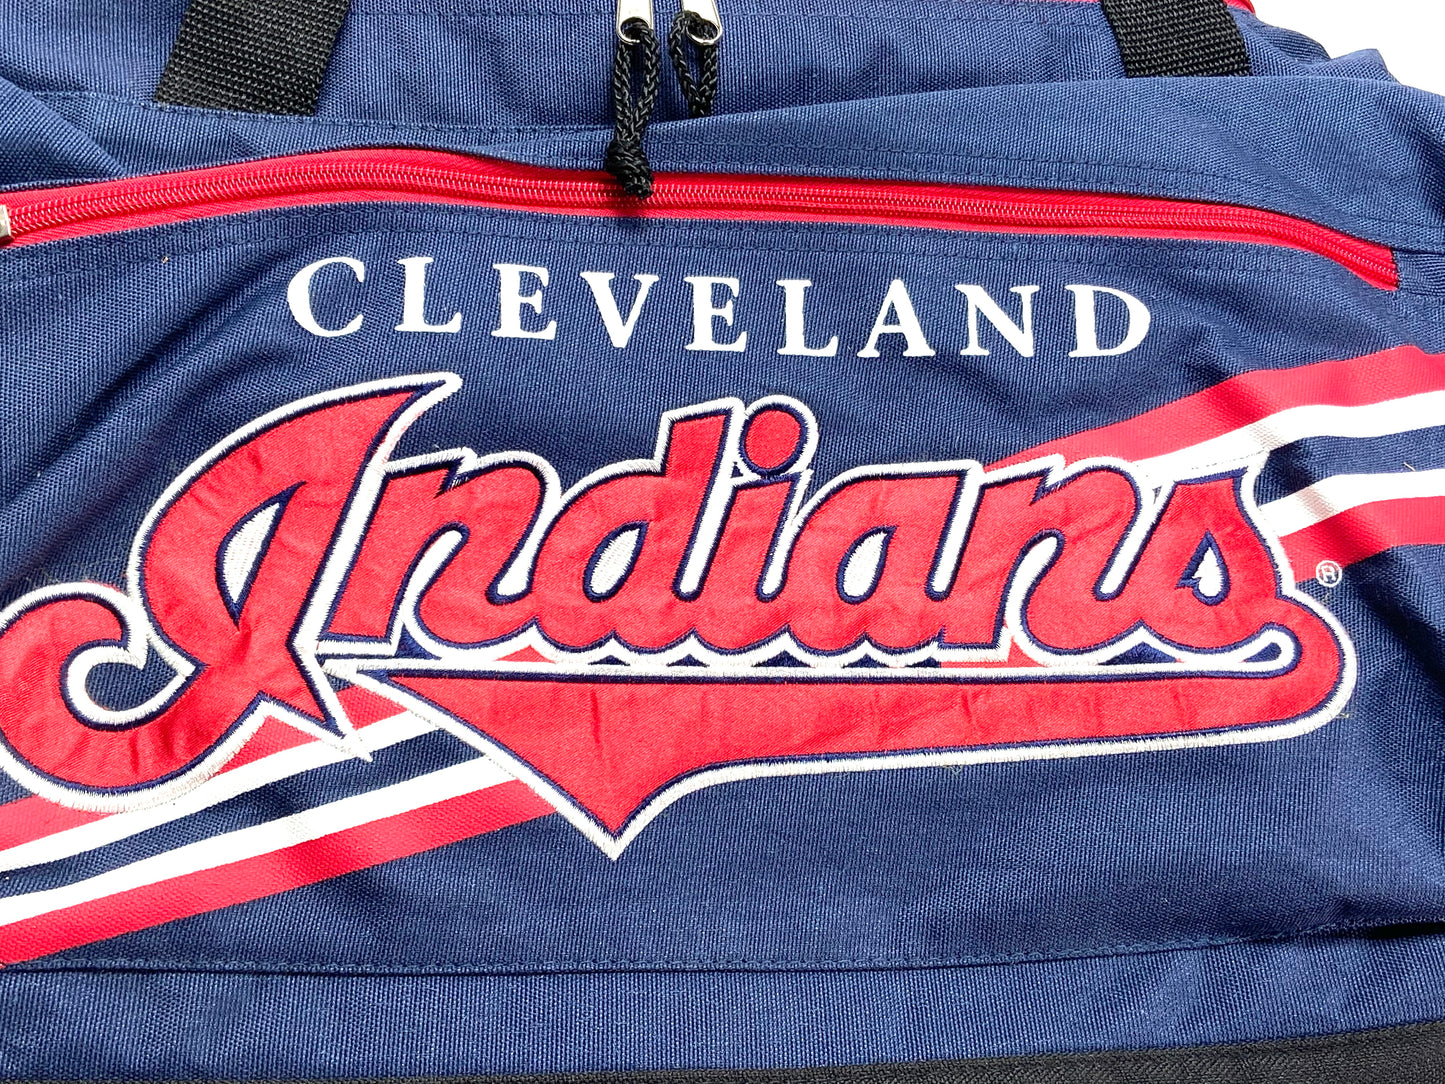 Cleveland Indians Vintage MLB Duffel Bag By (Undetermined)